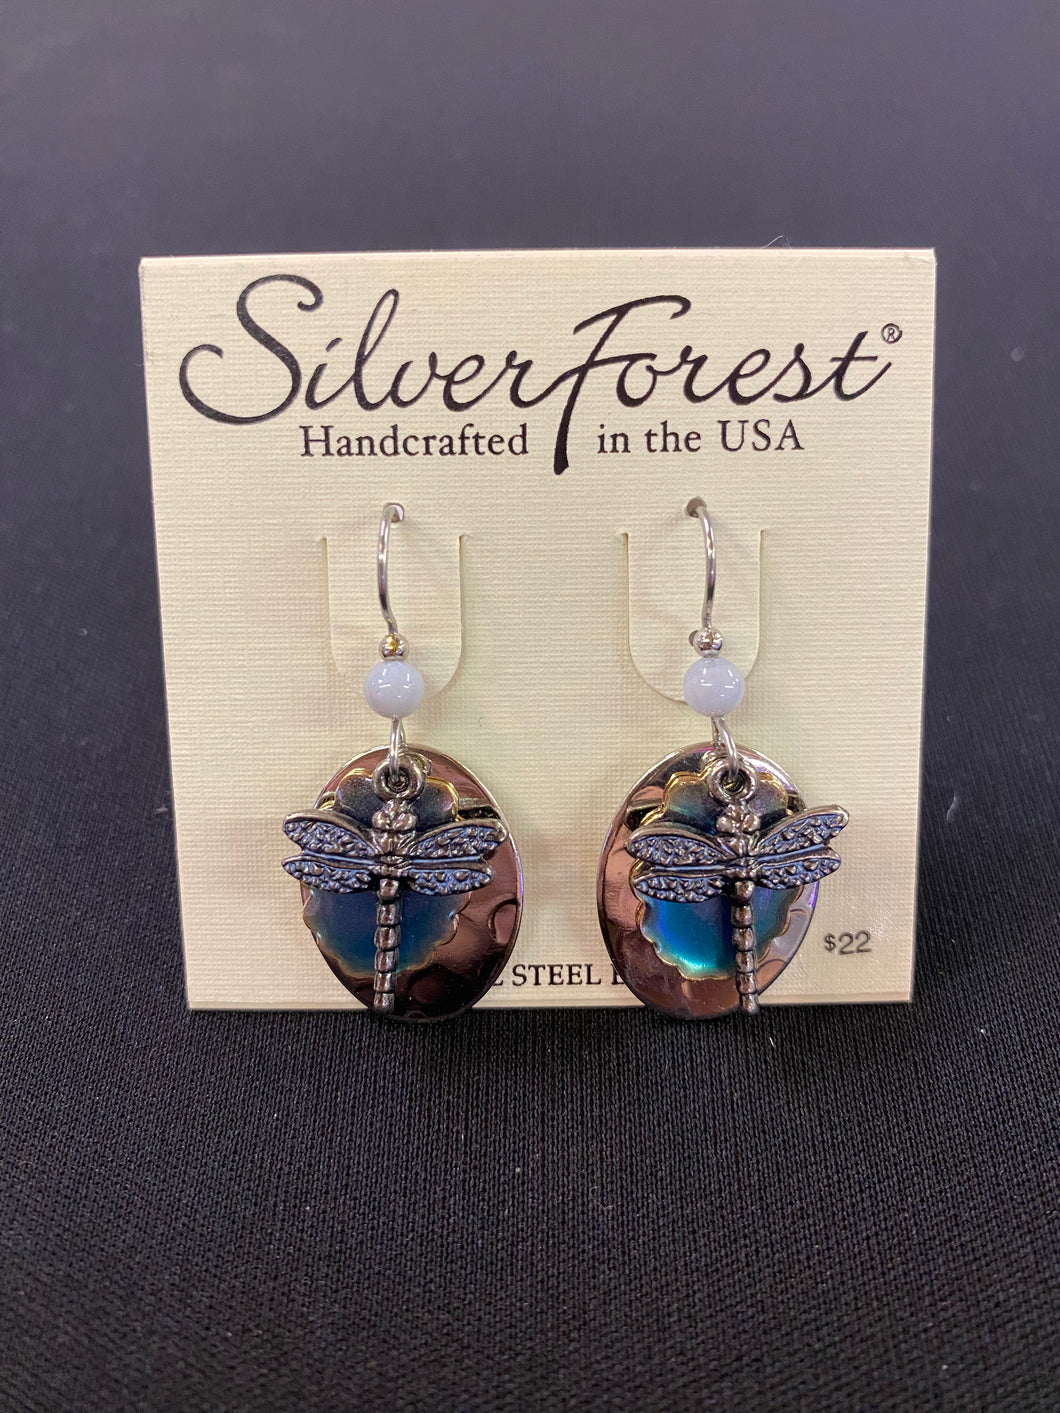 $22 Silver Forest Handcrafted Earrings